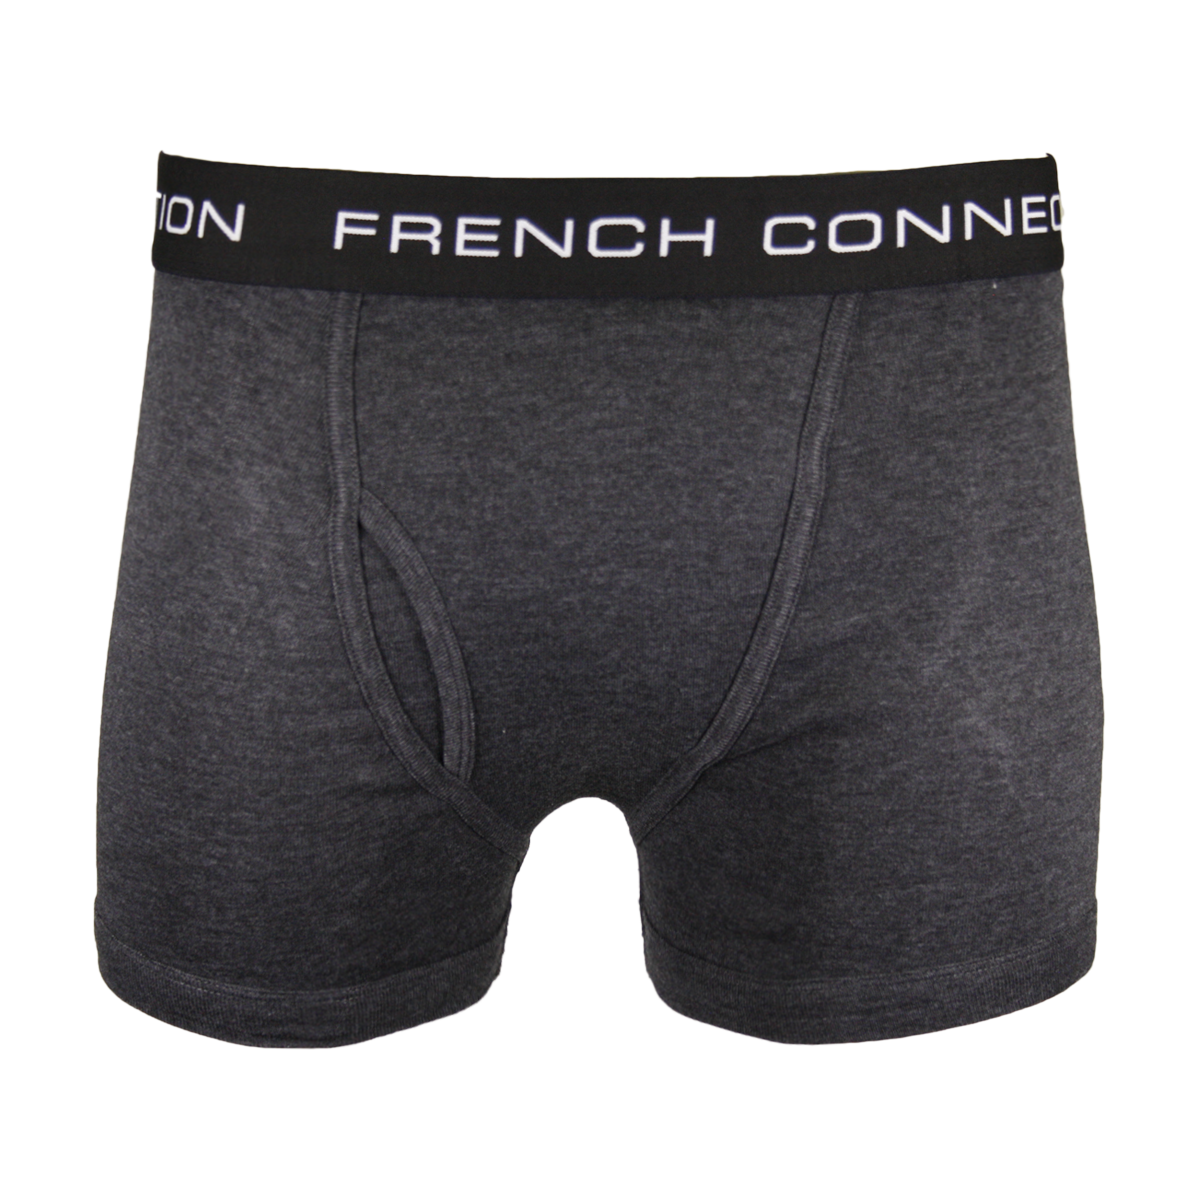 French Connection Men's 3 Pack Dark Grey w/ Black Strap Boxer Brief (S03)